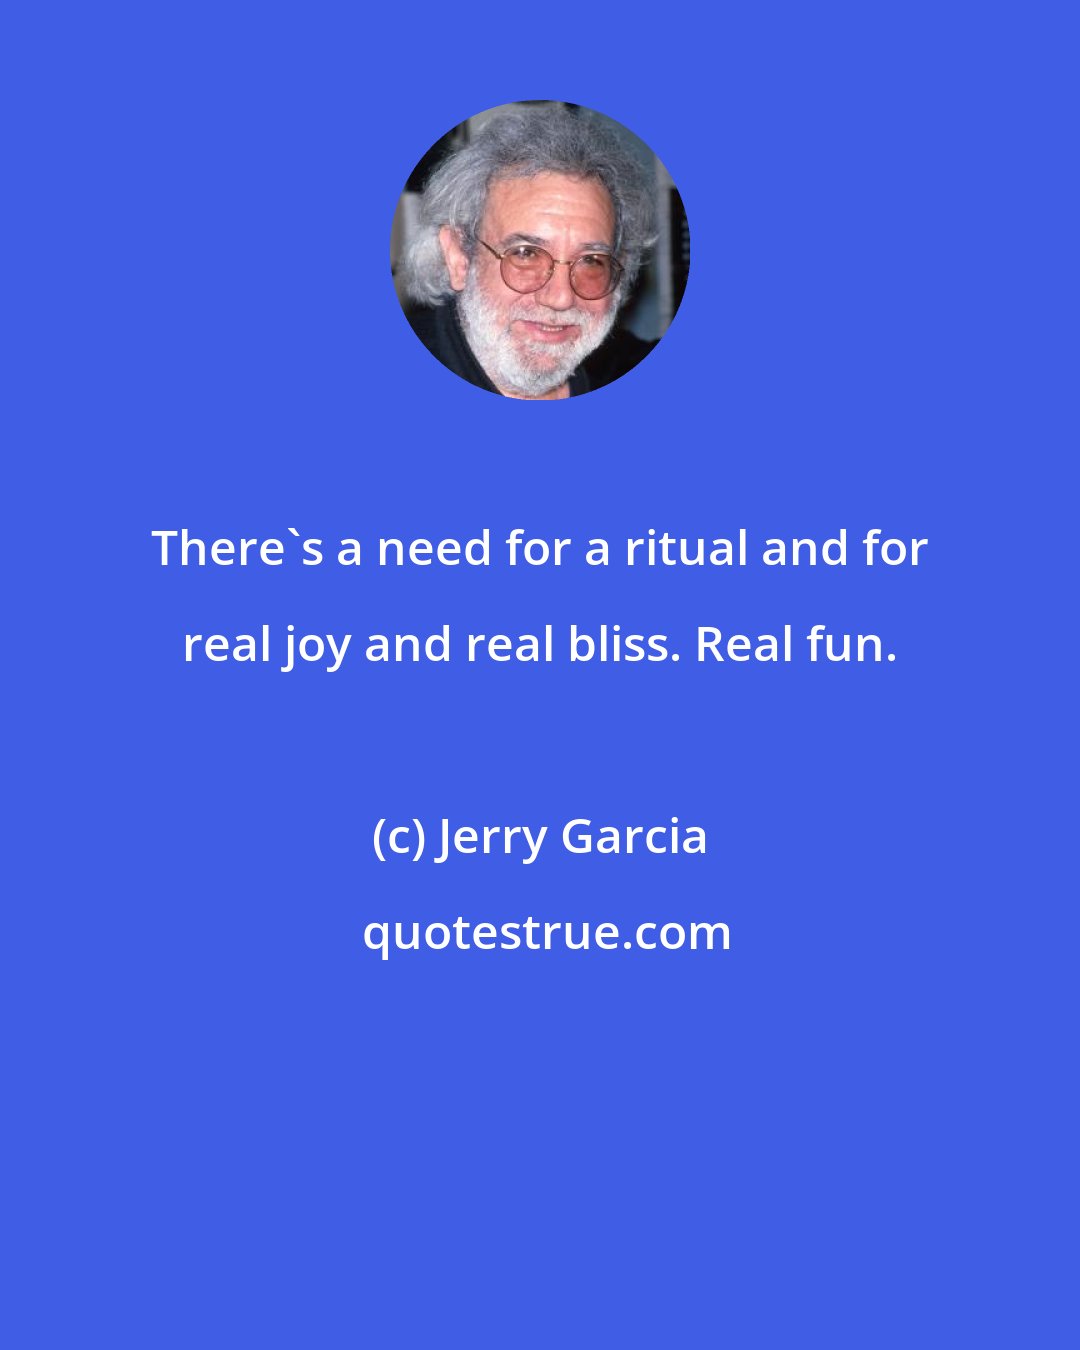 Jerry Garcia: There's a need for a ritual and for real joy and real bliss. Real fun.